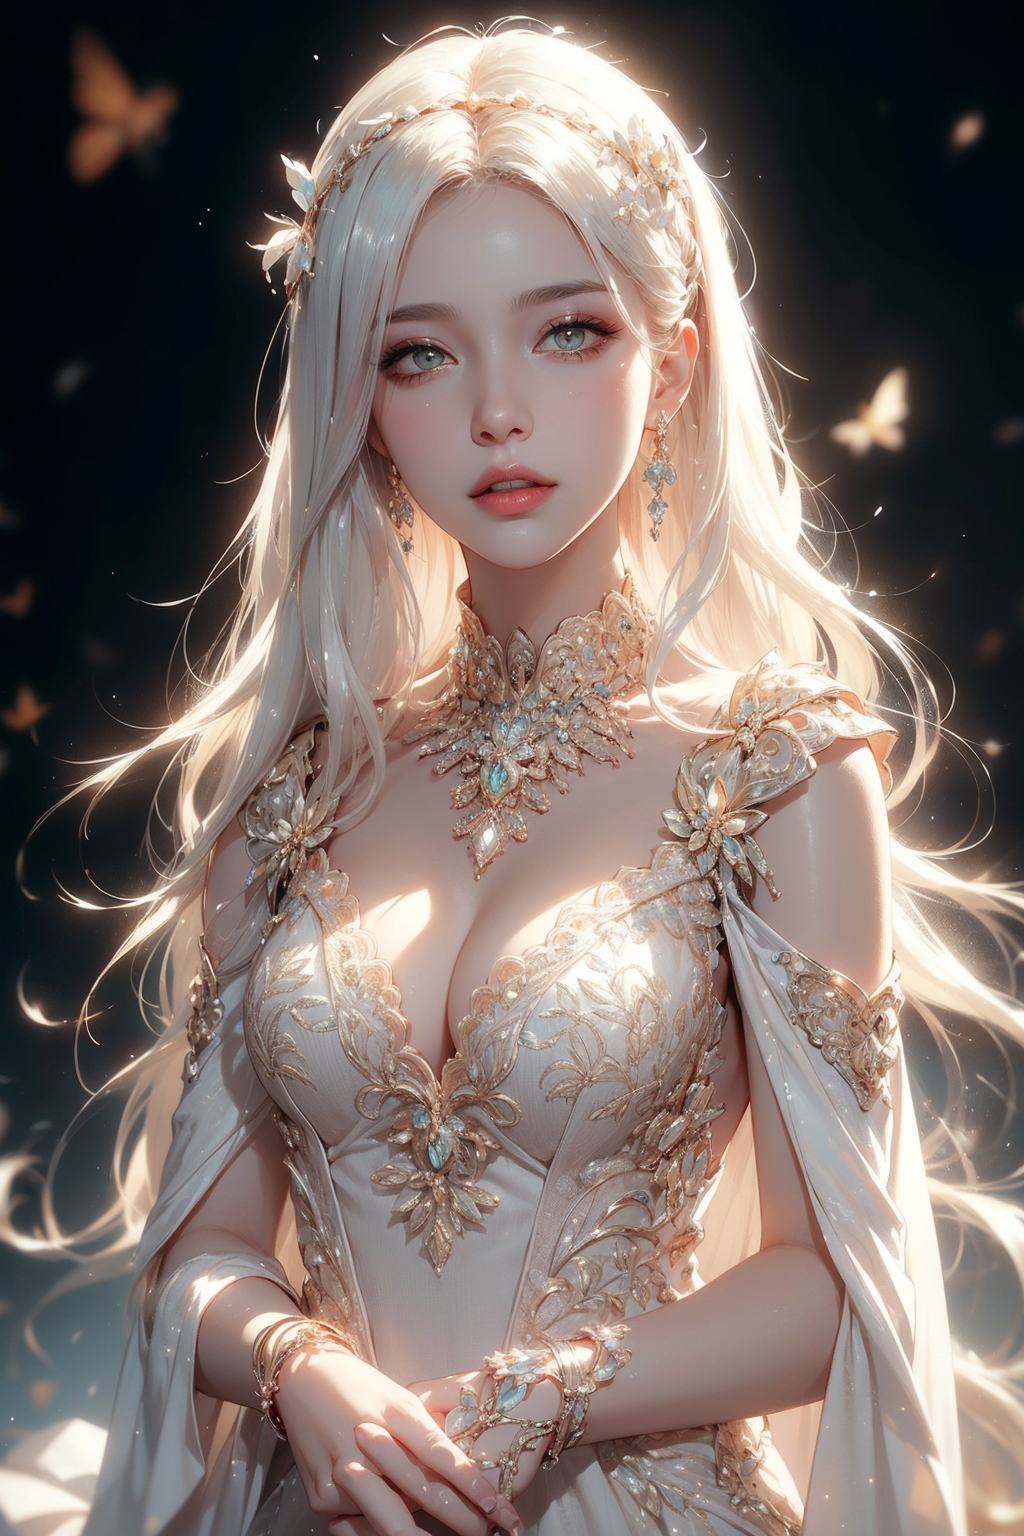 SanKo, women, hanging boobs, looking at viewer, collarbone, cleavage, long  hair, Asian, AI art, boobs, loose clothing, illustration, digital art,  portrait display, window, desk, necklace, curtains